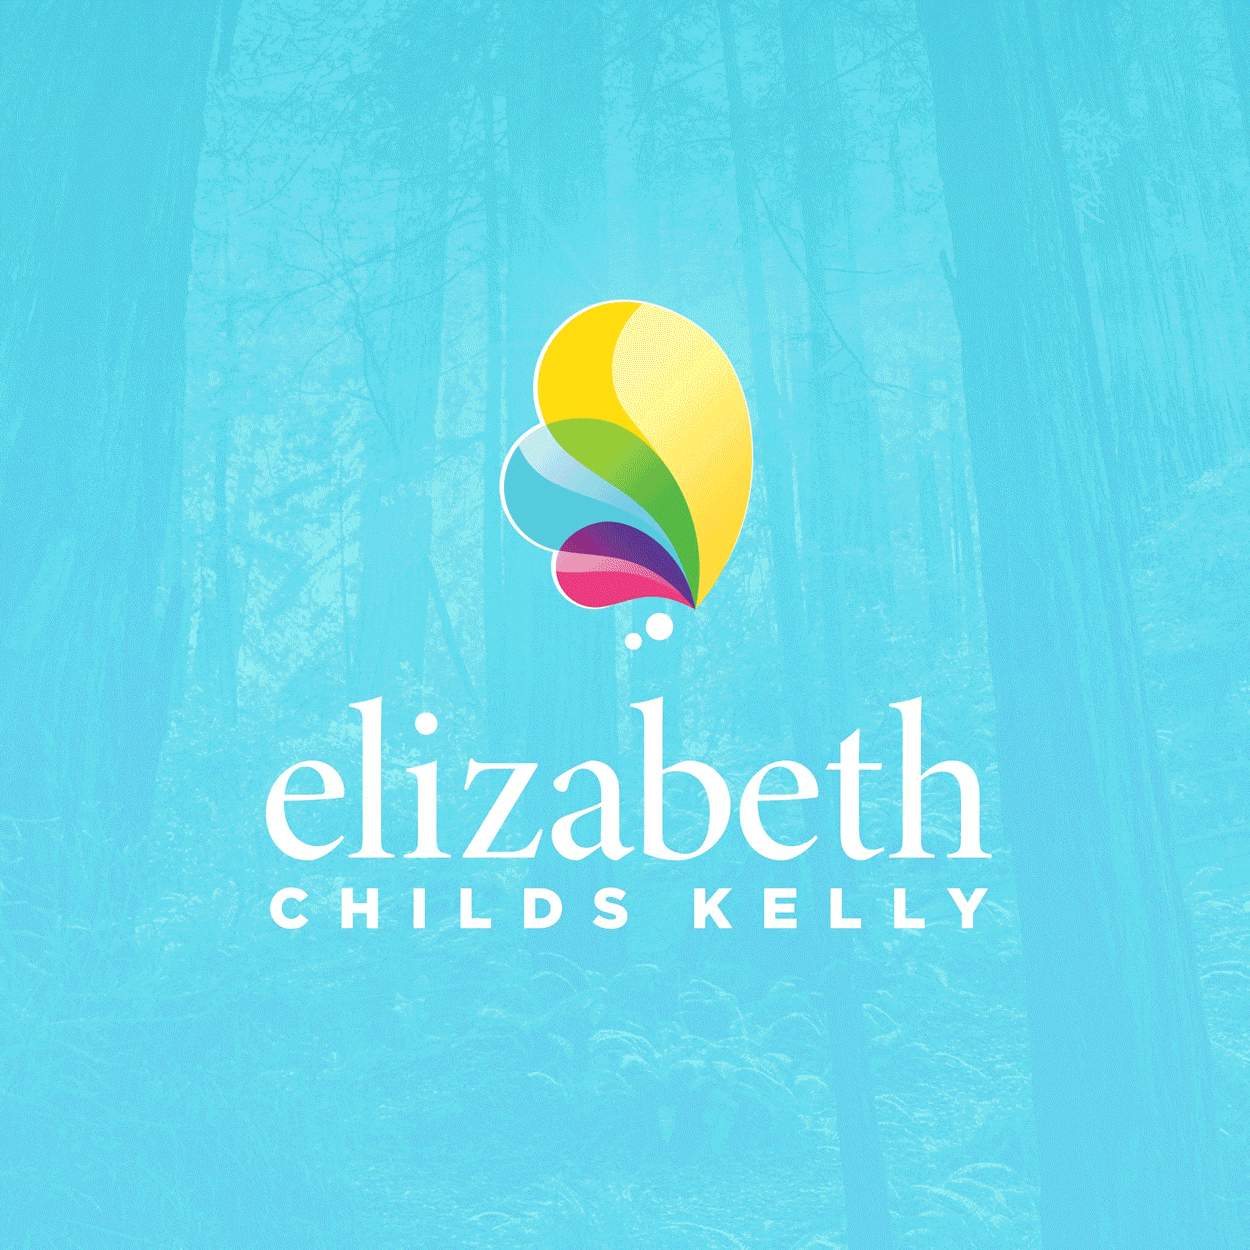 Elizabeth-Liz-Childs-Kelly-Home-to-Her-Logo+Branding+Website-by-Spade-and-Anchor-Creative.gif